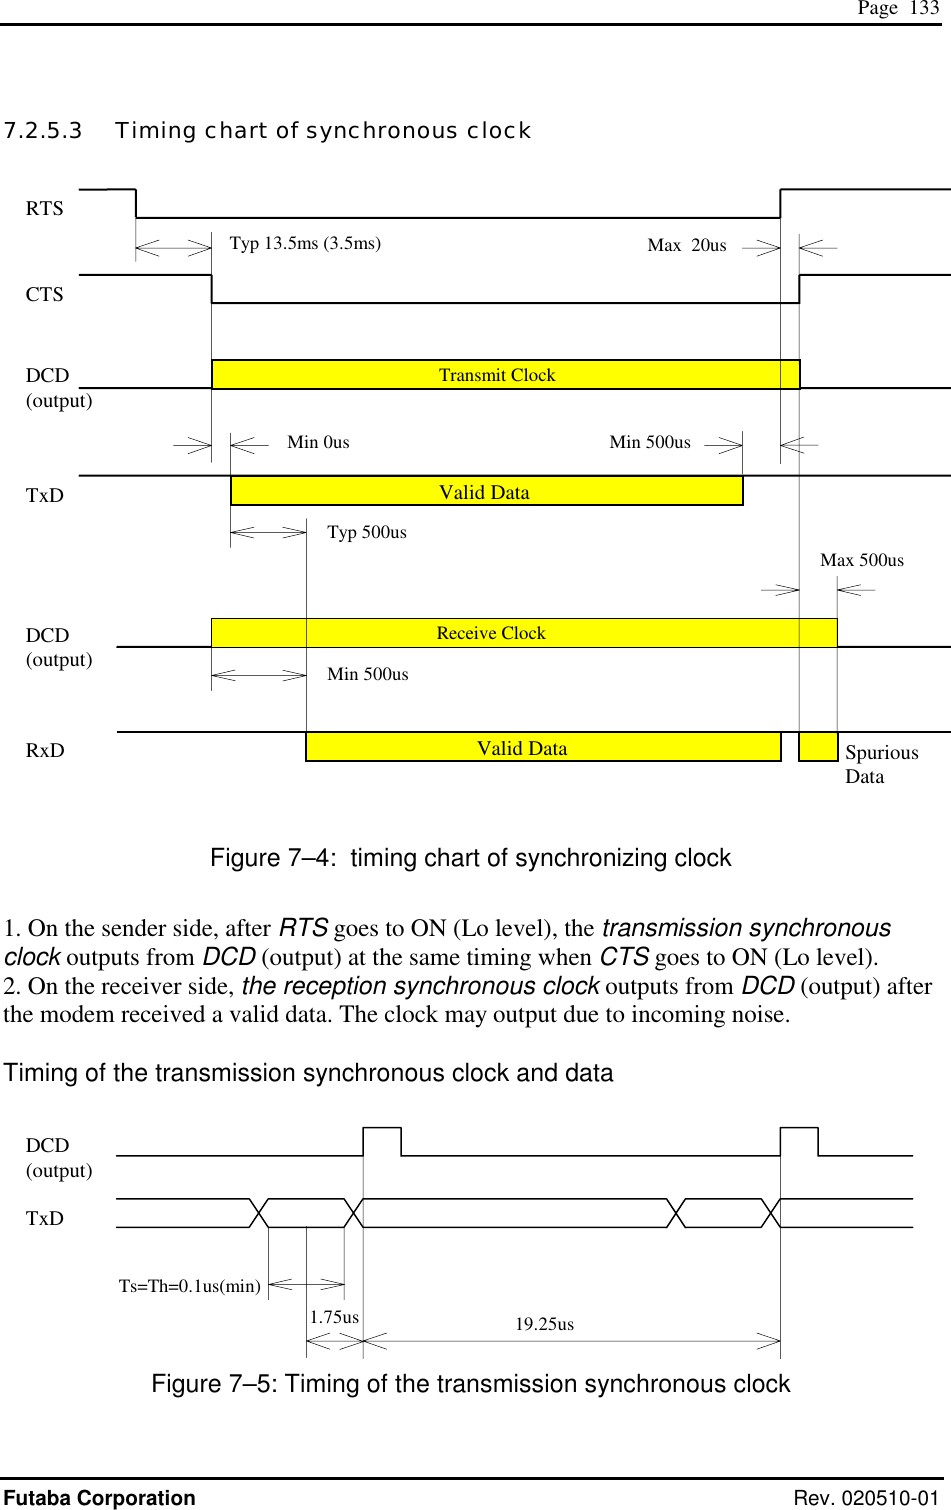  Page  133 Futaba Corporation Rev. 020510-01 7.2.5.3   Timing chart of synchronous clock                        Figure 7–4:  timing chart of synchronizing clock 1. On the sender side, after RTS goes to ON (Lo level), the transmission synchronous clock outputs from DCD (output) at the same timing when CTS goes to ON (Lo level).  2. On the receiver side, the reception synchronous clock outputs from DCD (output) after the modem received a valid data. The clock may output due to incoming noise.  Timing of the transmission synchronous clock and data          Figure 7–5: Timing of the transmission synchronous clock  Typ 13.5ms (3.5ms) Min 0us Valid Data Min 500us Max  20us Transmit Clock Valid Data Receive Clock Typ 500us Min 500us Max 500us 1.75us  19.25us Ts=Th=0.1us(min) RTS CTS DCD (output) TxD DCD (output) RxD  Spurious Data DCD (output) TxD 